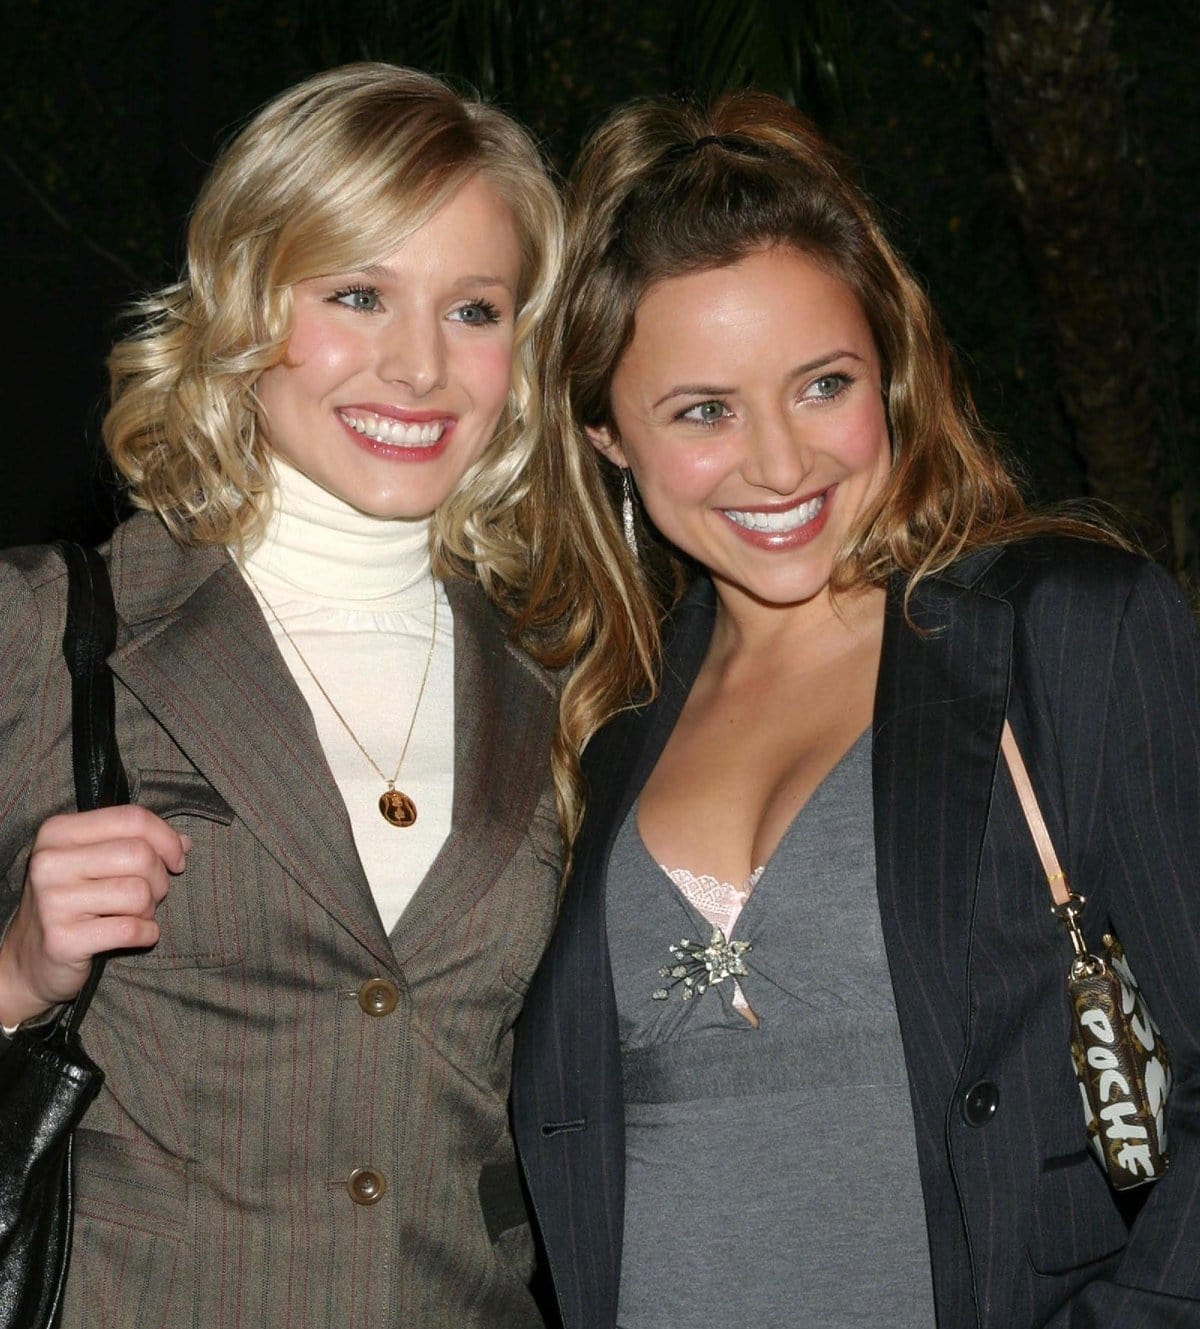 Kristen Bell and Christine Lakin promoting their made-for-television musical comedy film Reefer Madness: The Movie Musical